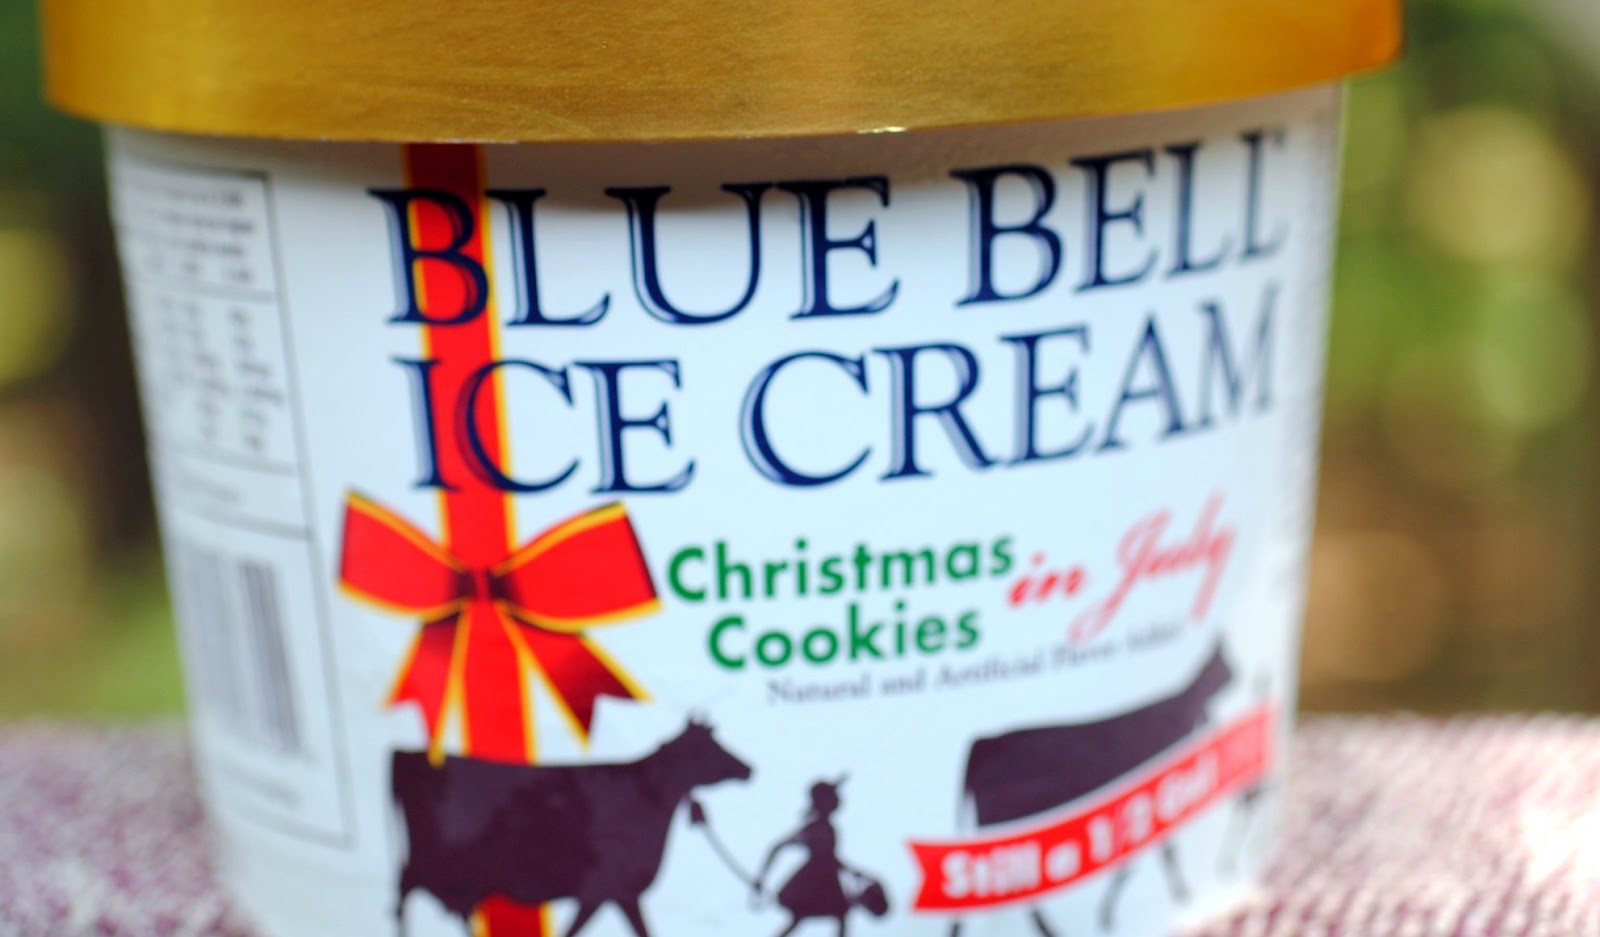 Blue Bell Ice Cream Christmas Cookies
 food and ice cream recipes REVIEW Blue Bell Christmas